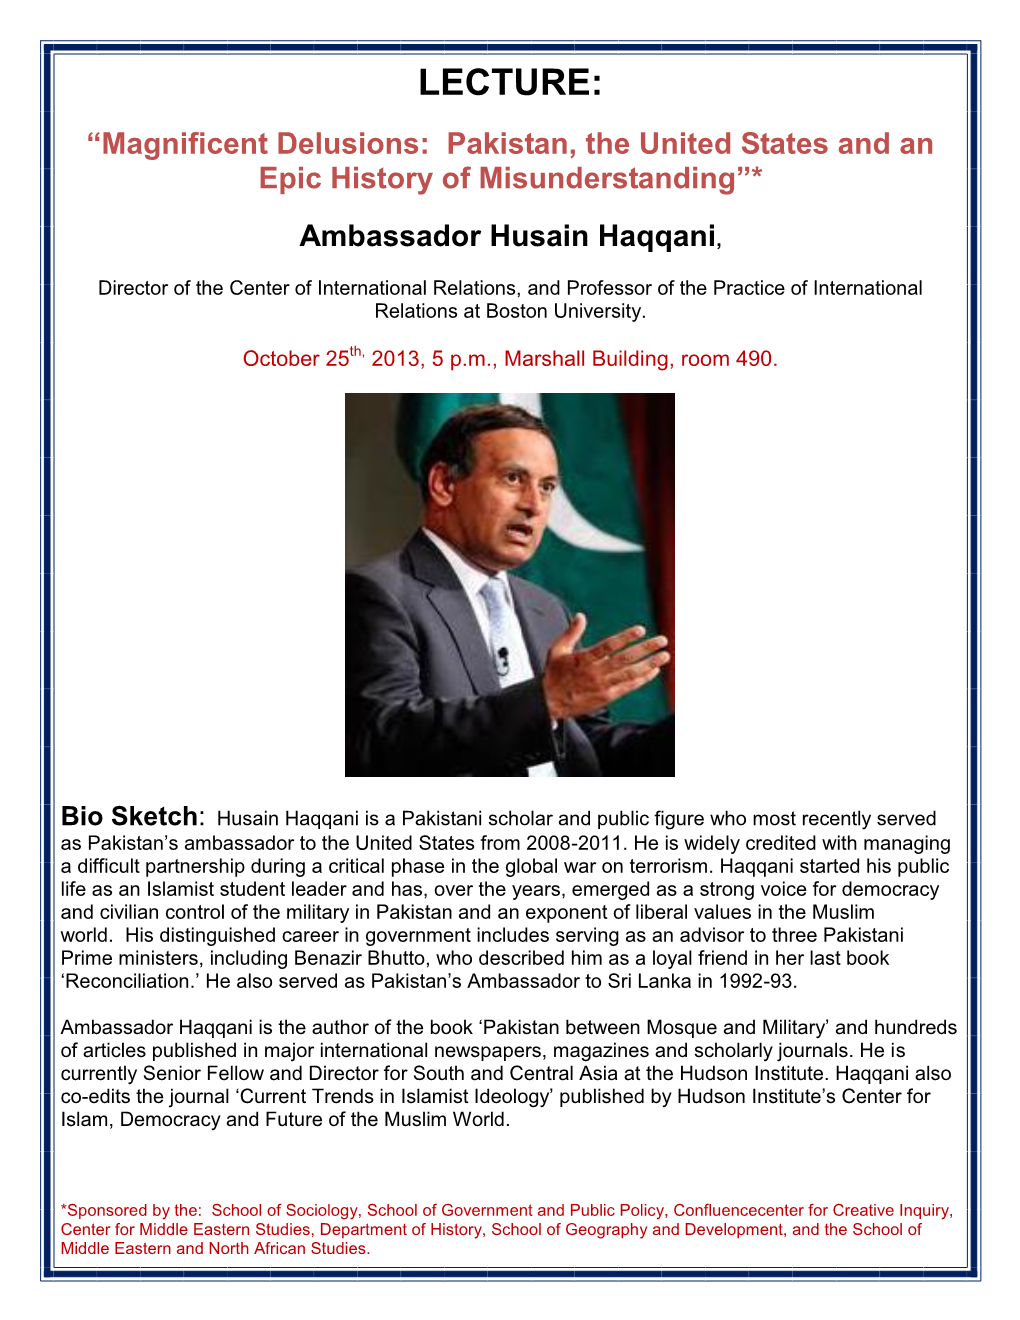 LECTURE: “Magnificent Delusions: Pakistan, the United States and an Epic History of Misunderstanding”*